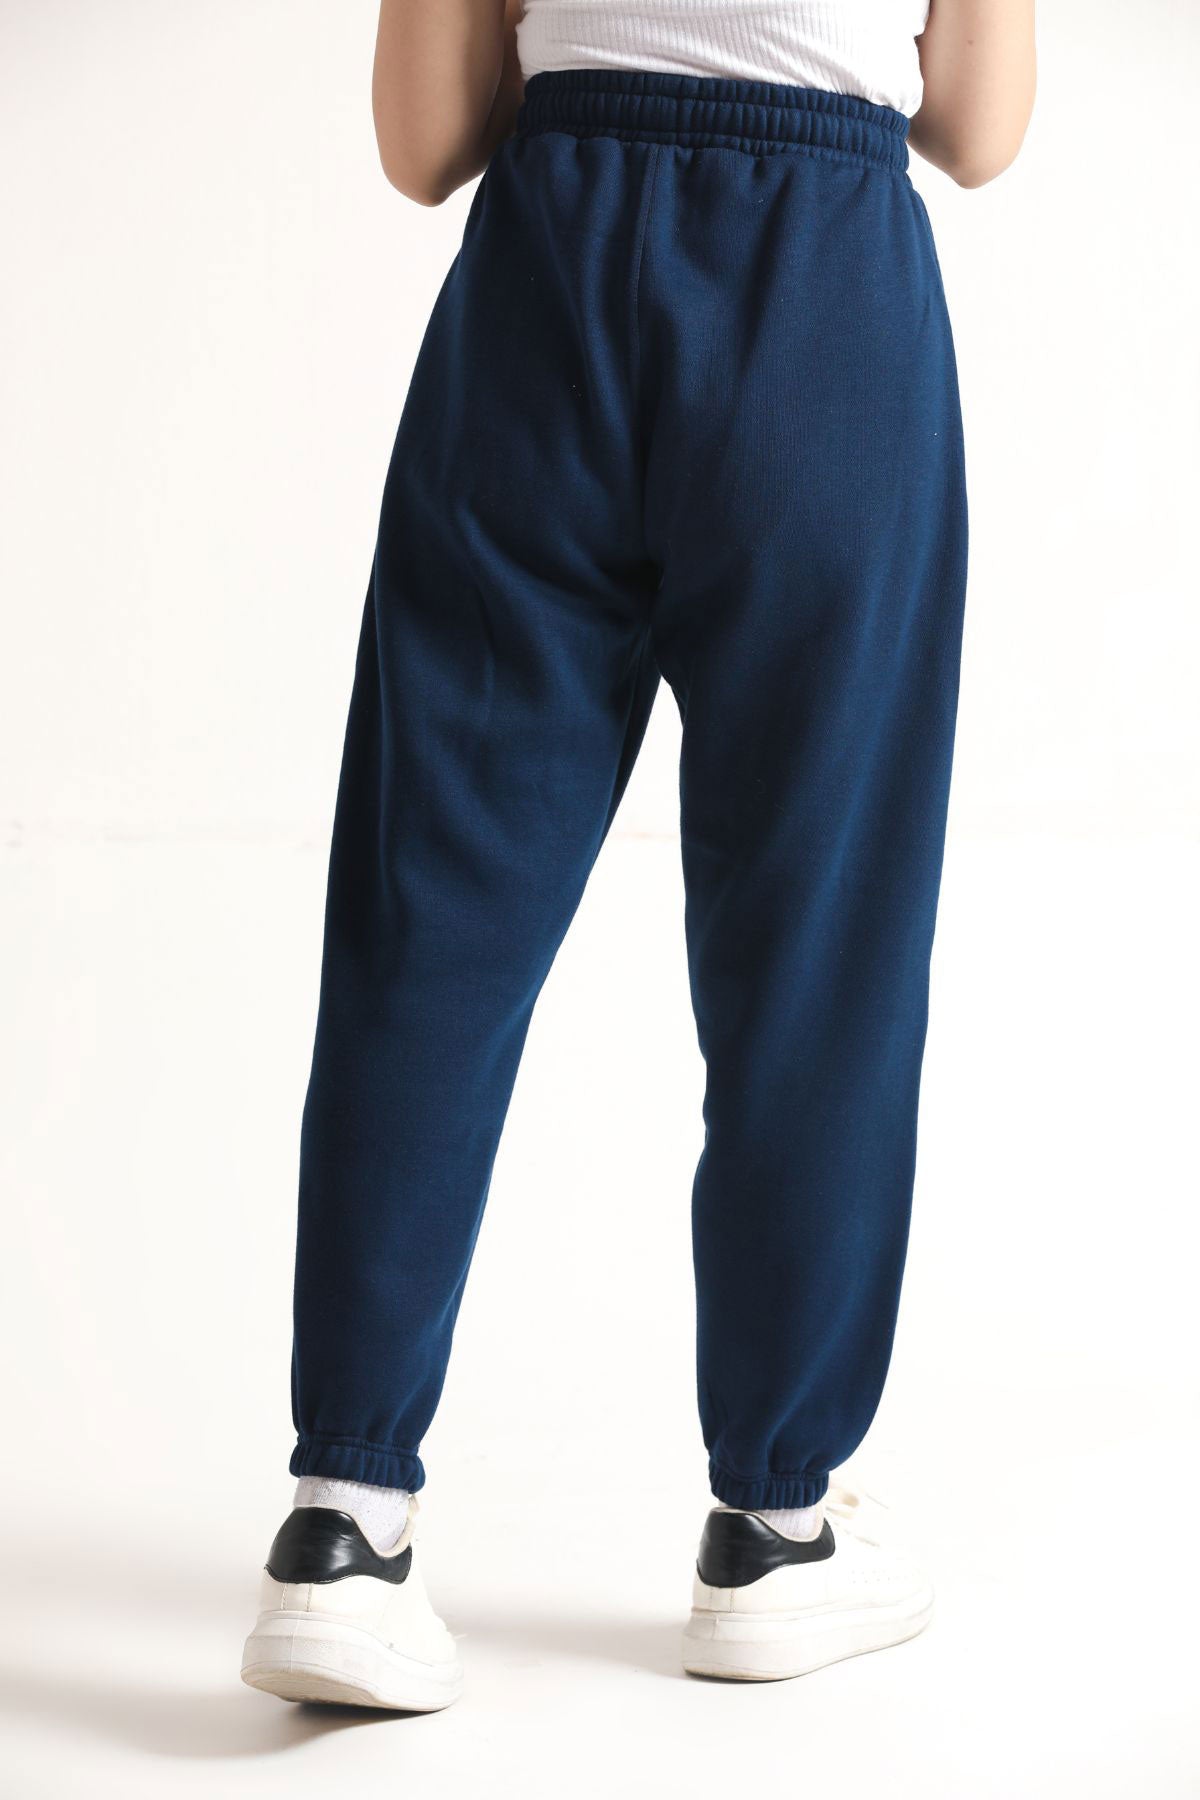 SCULPT ULTRA COMFORT CARGO TROUSERS- NAVY BLUE - The Orion Fit